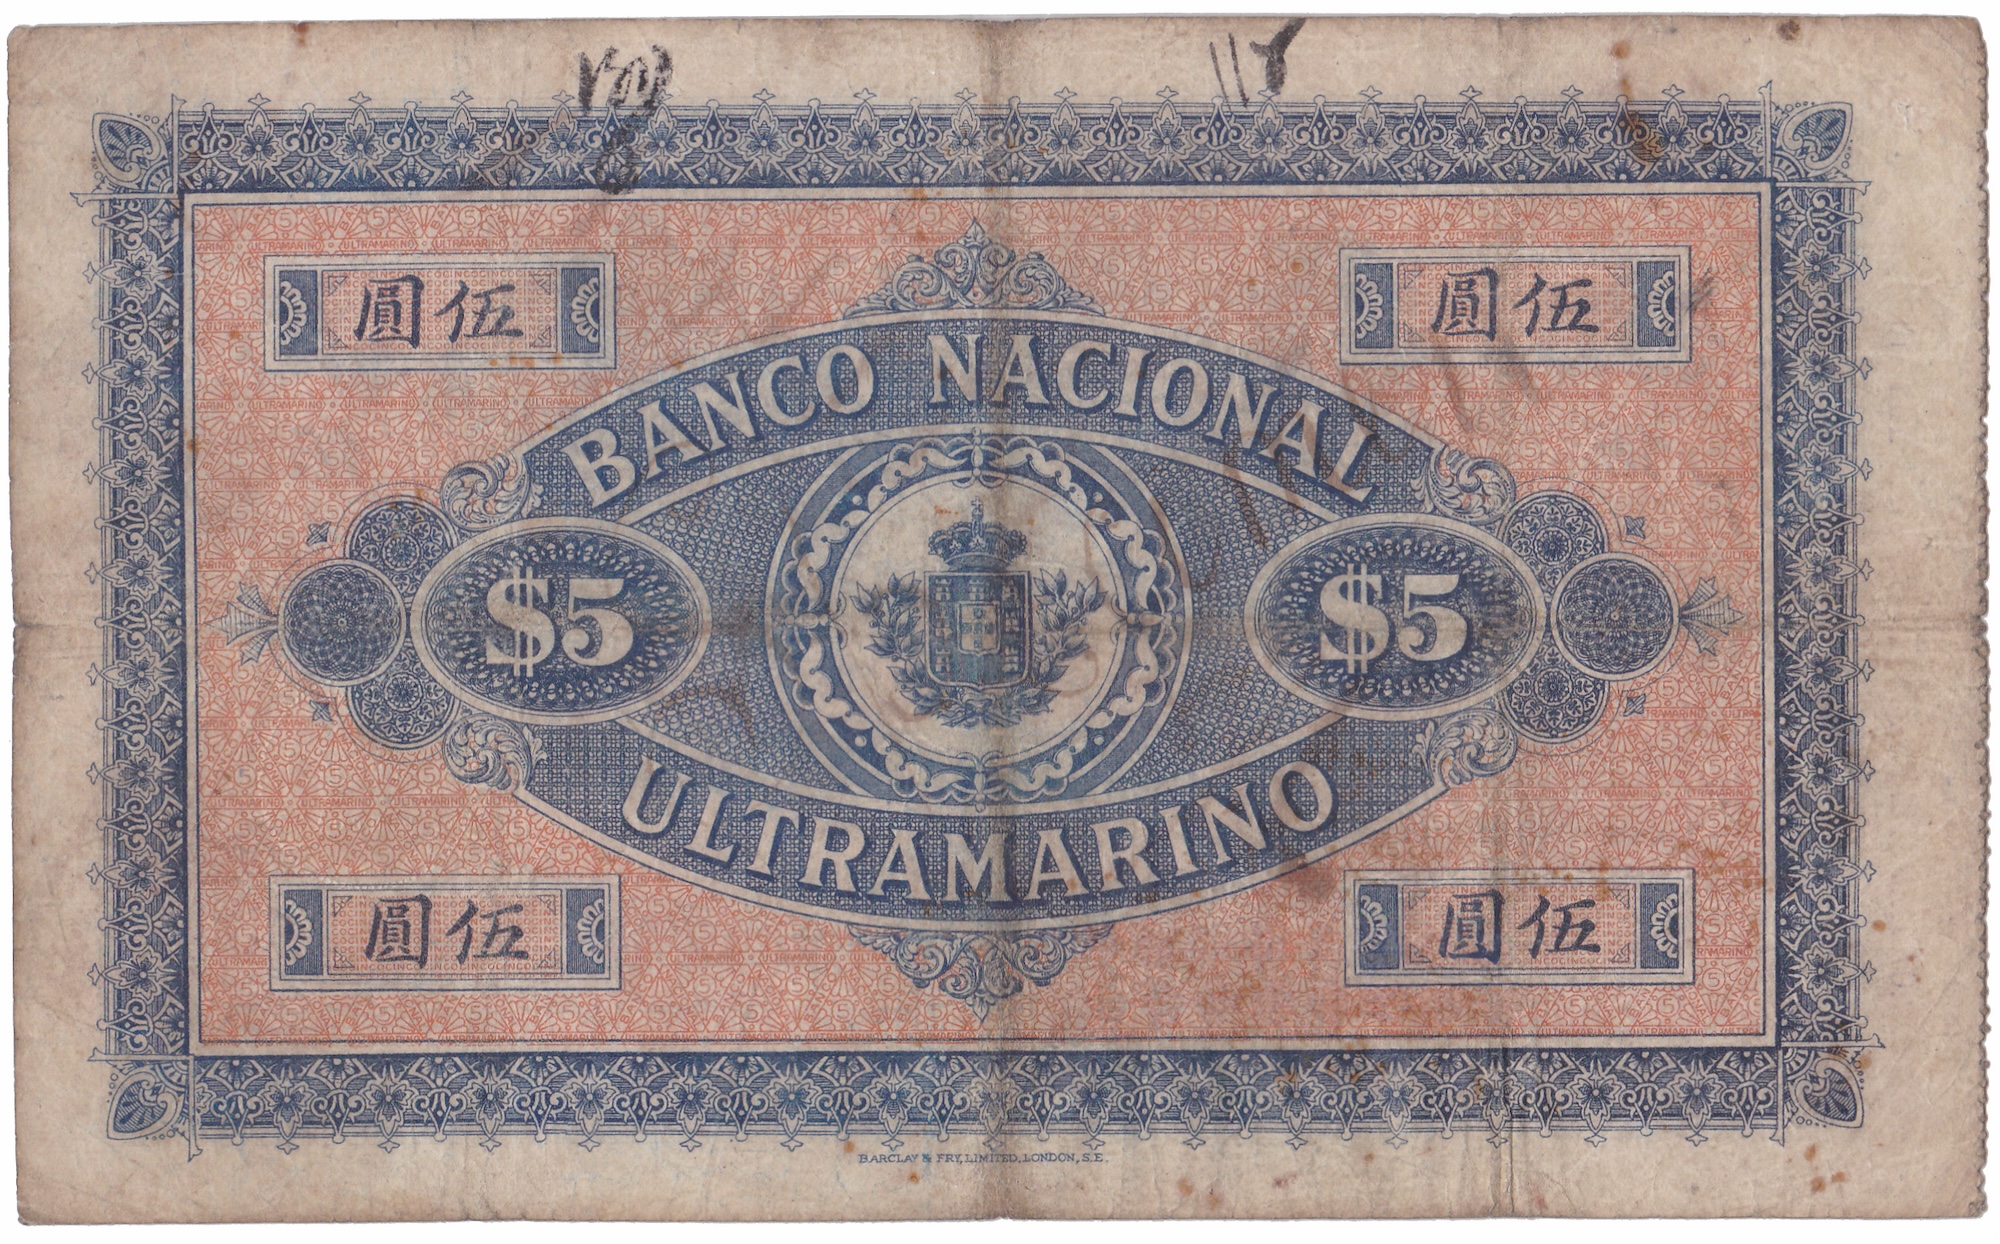 This five pataca banknote was issued by BNU in 1905. Each note was personally signed by the director